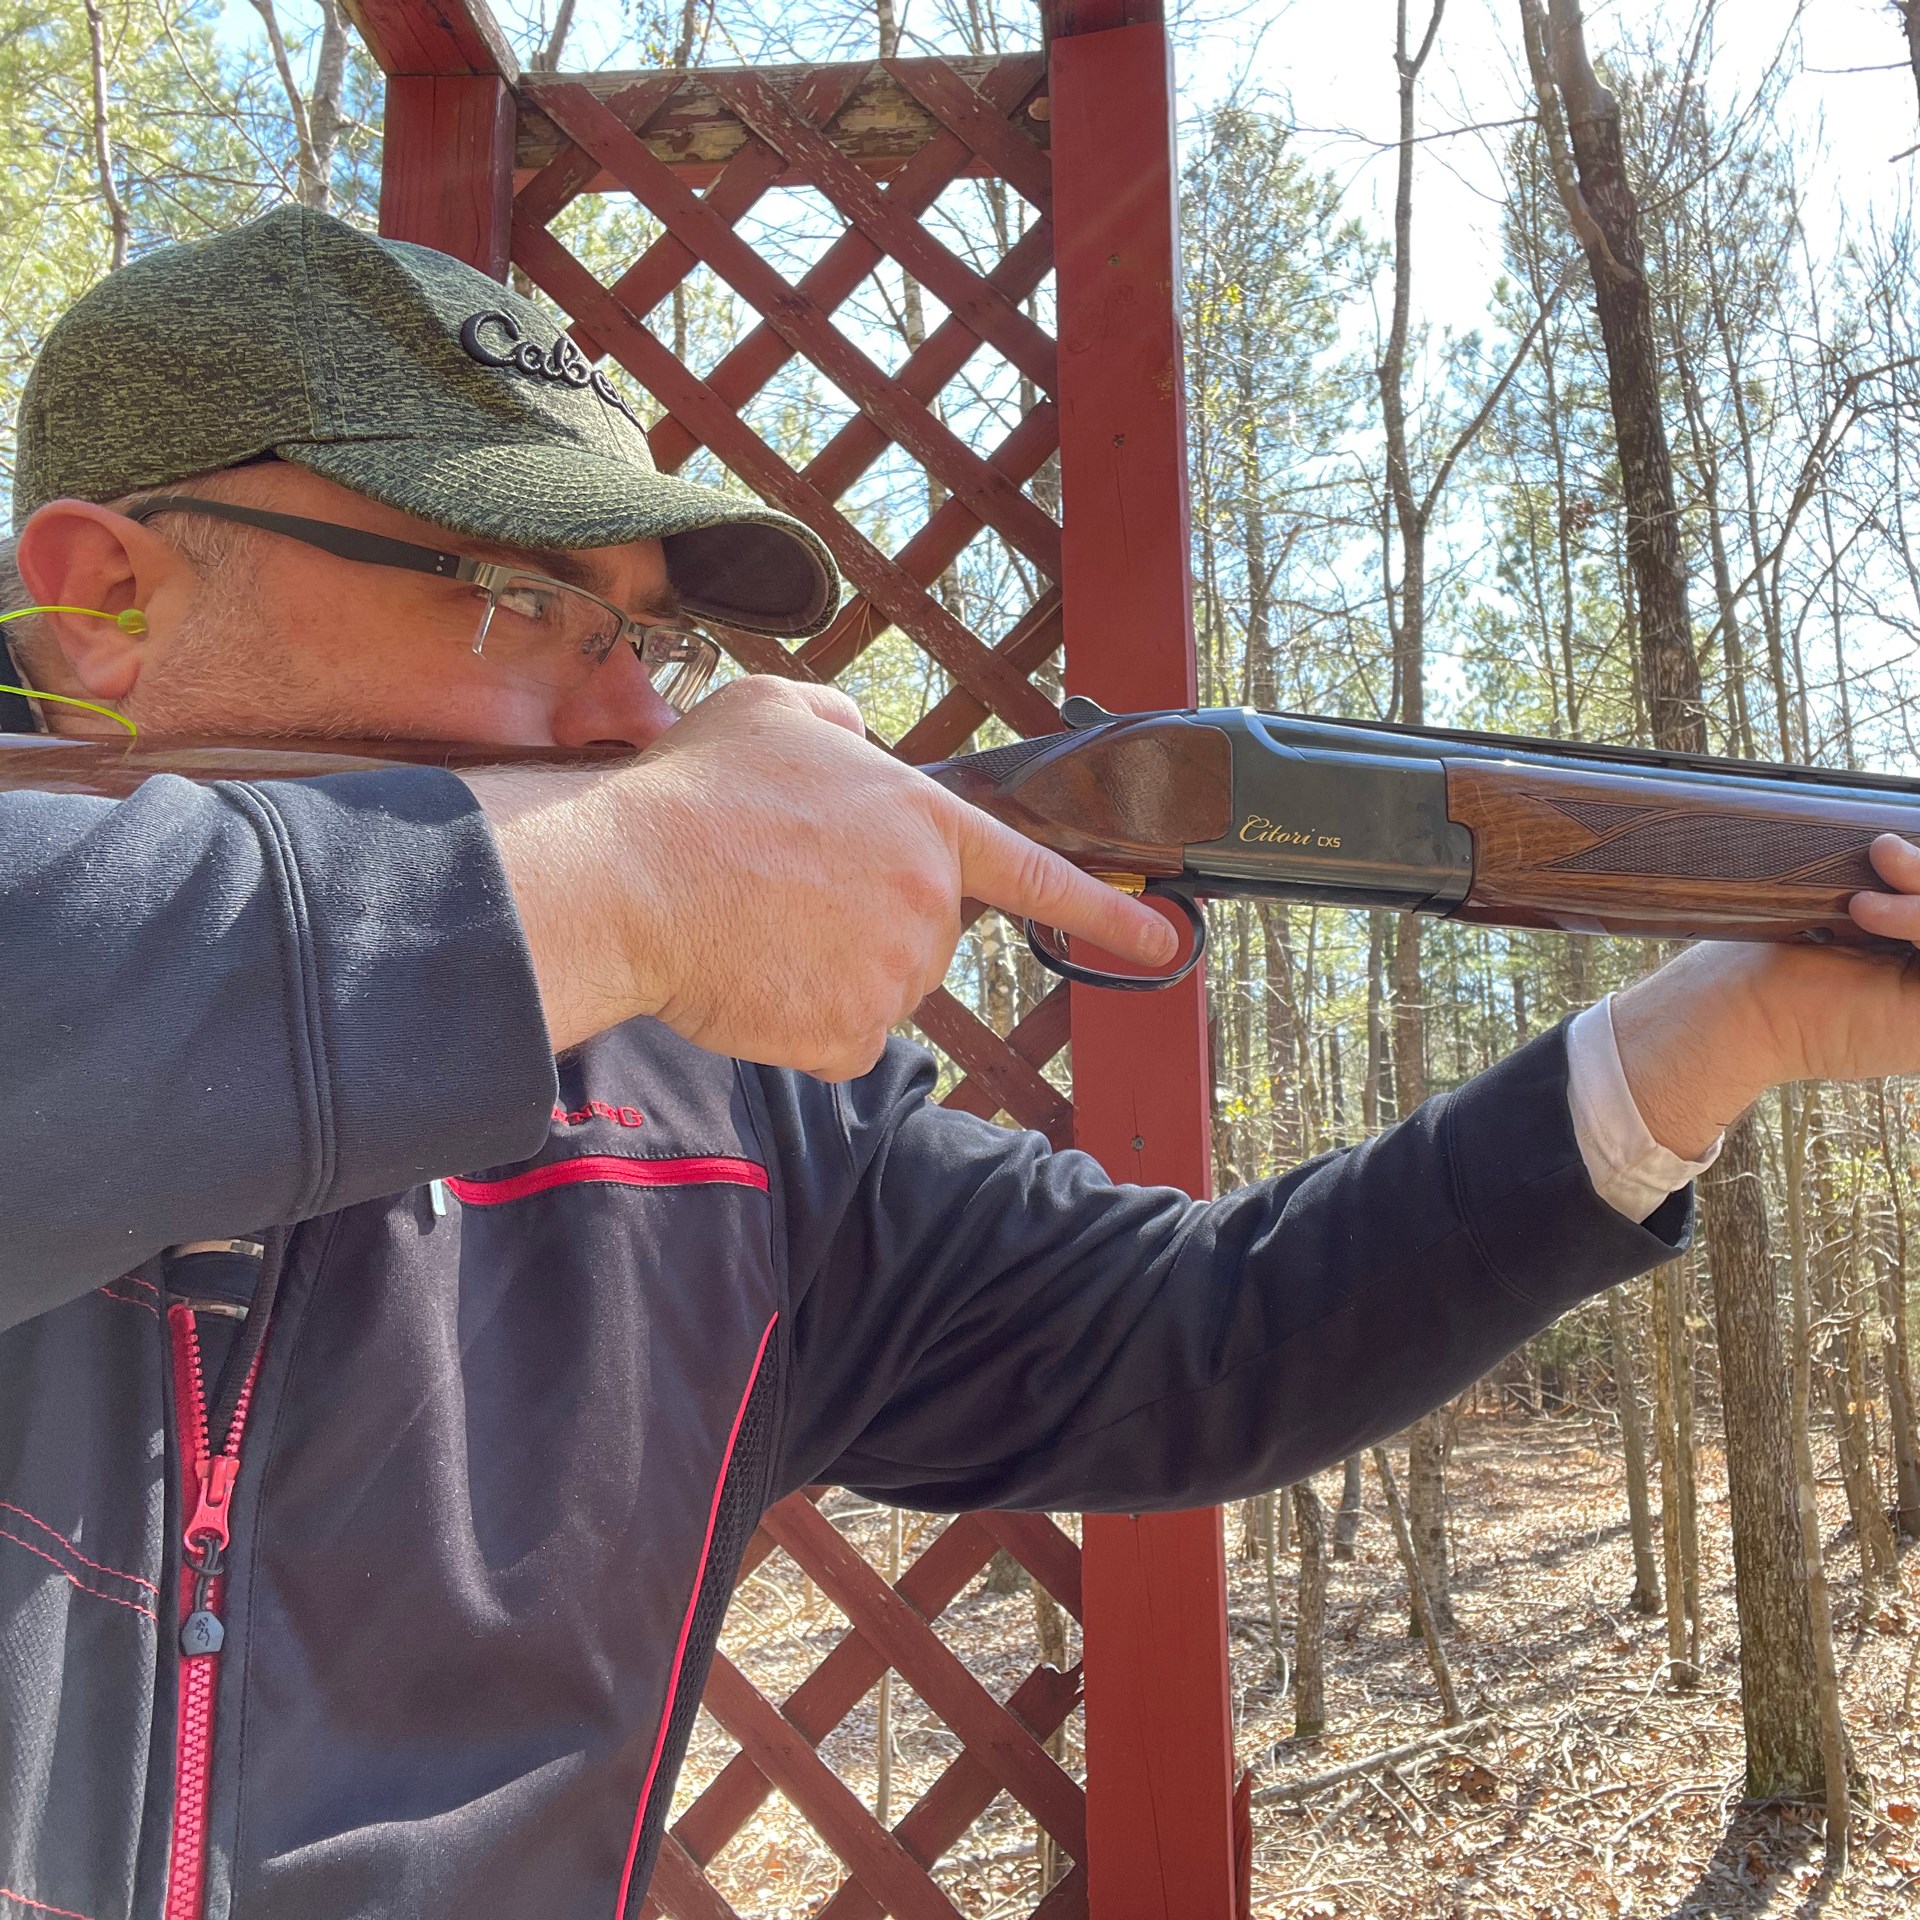 Man outdoors holding point shotgun nra safety rules finger off trigger until ready to fire